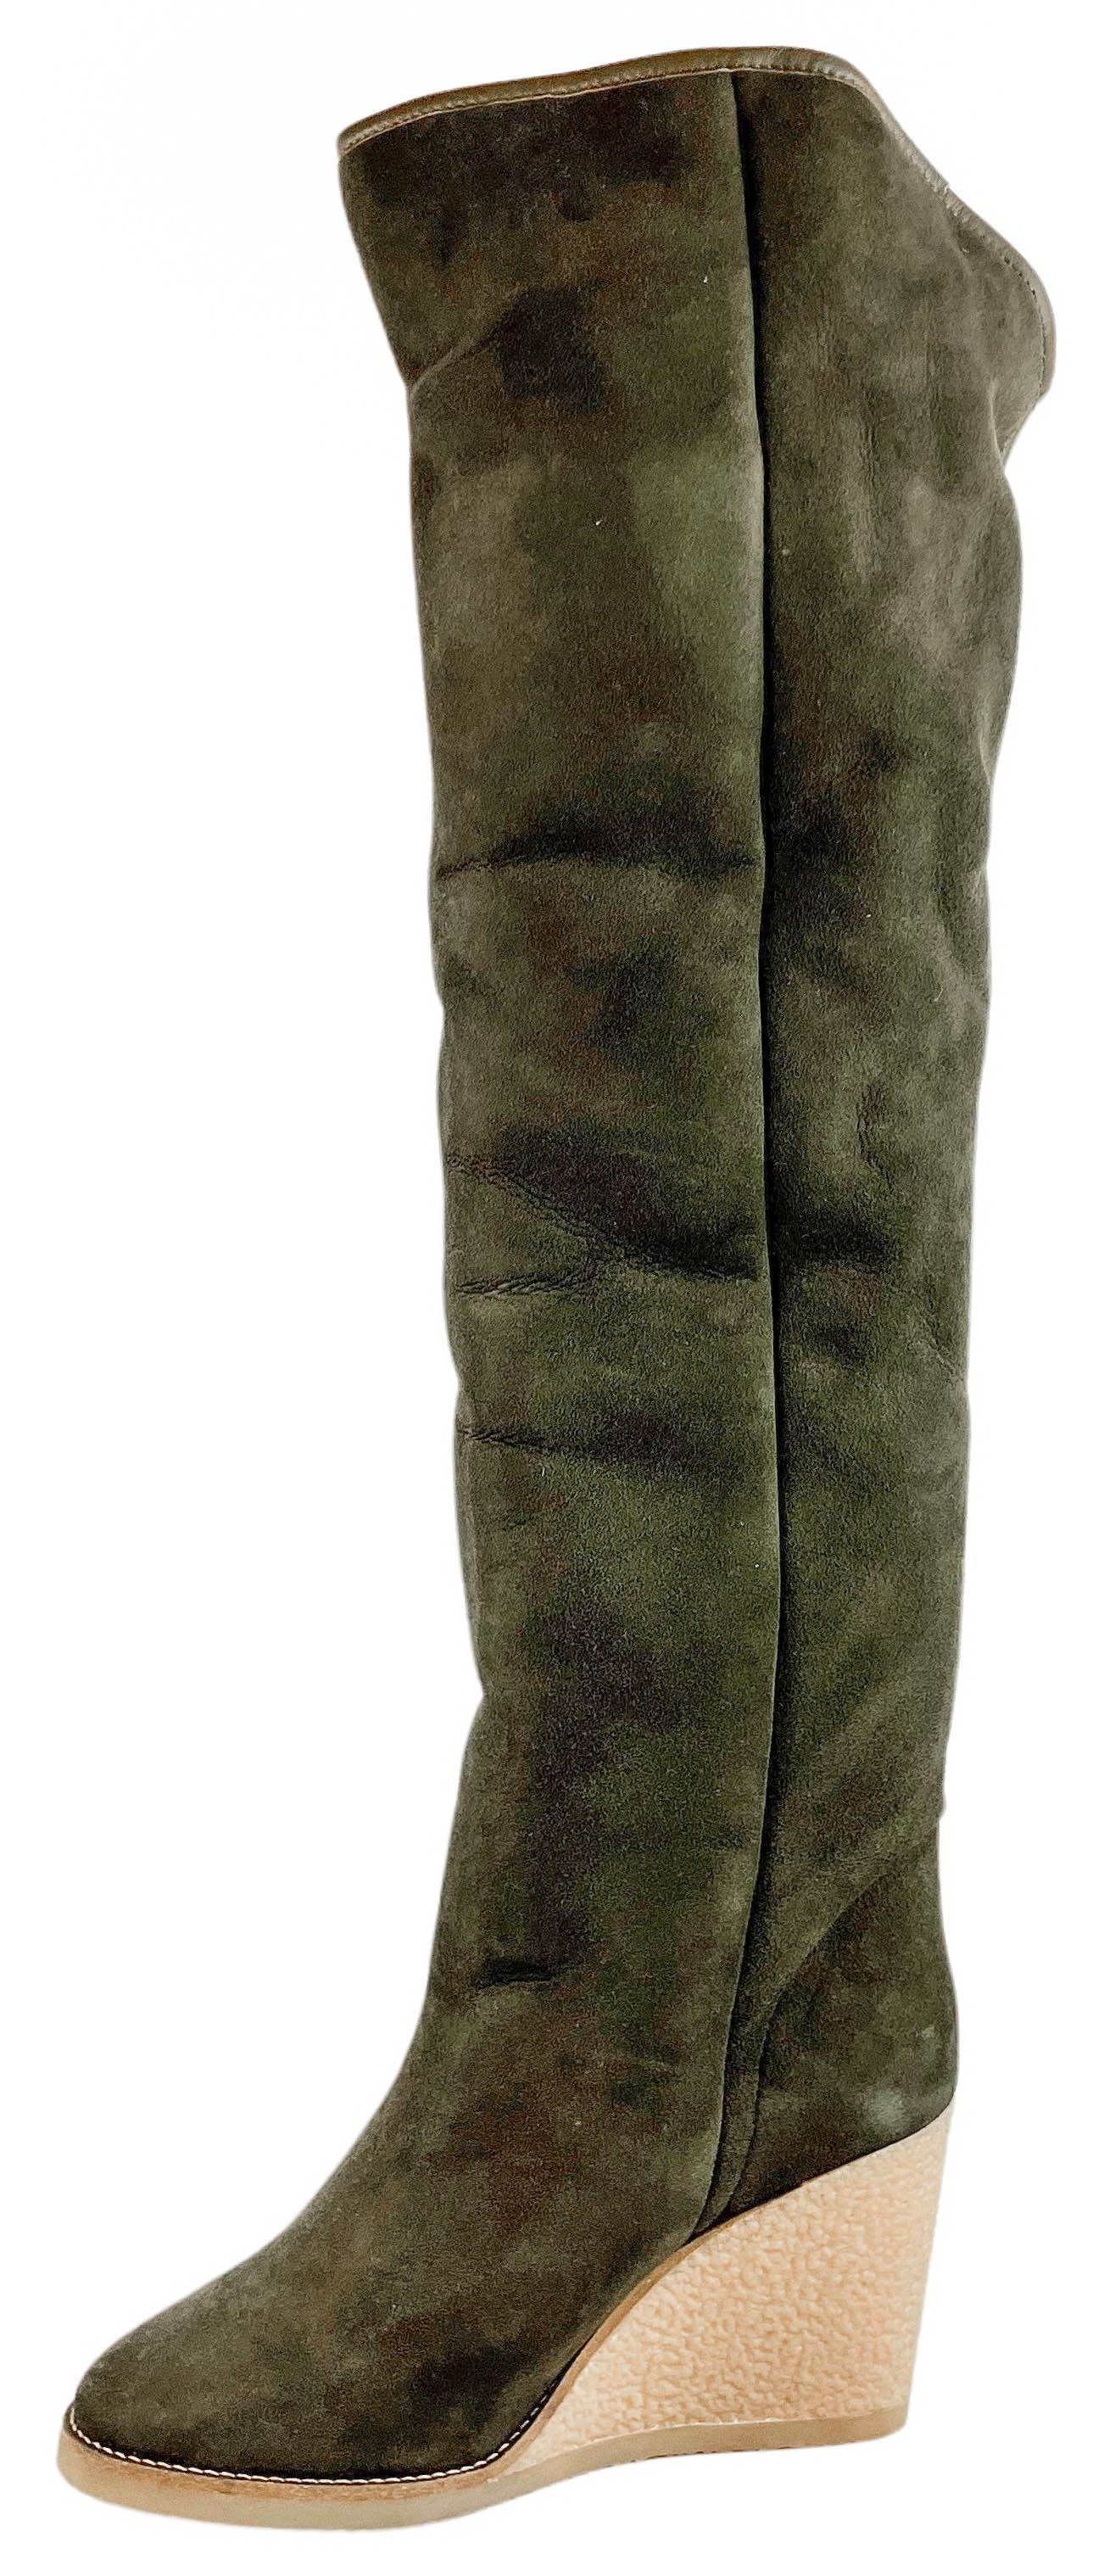 Isabel Marant Shearling Wedge Boots in Khaki - Discounts on Isabel Marant at UAL